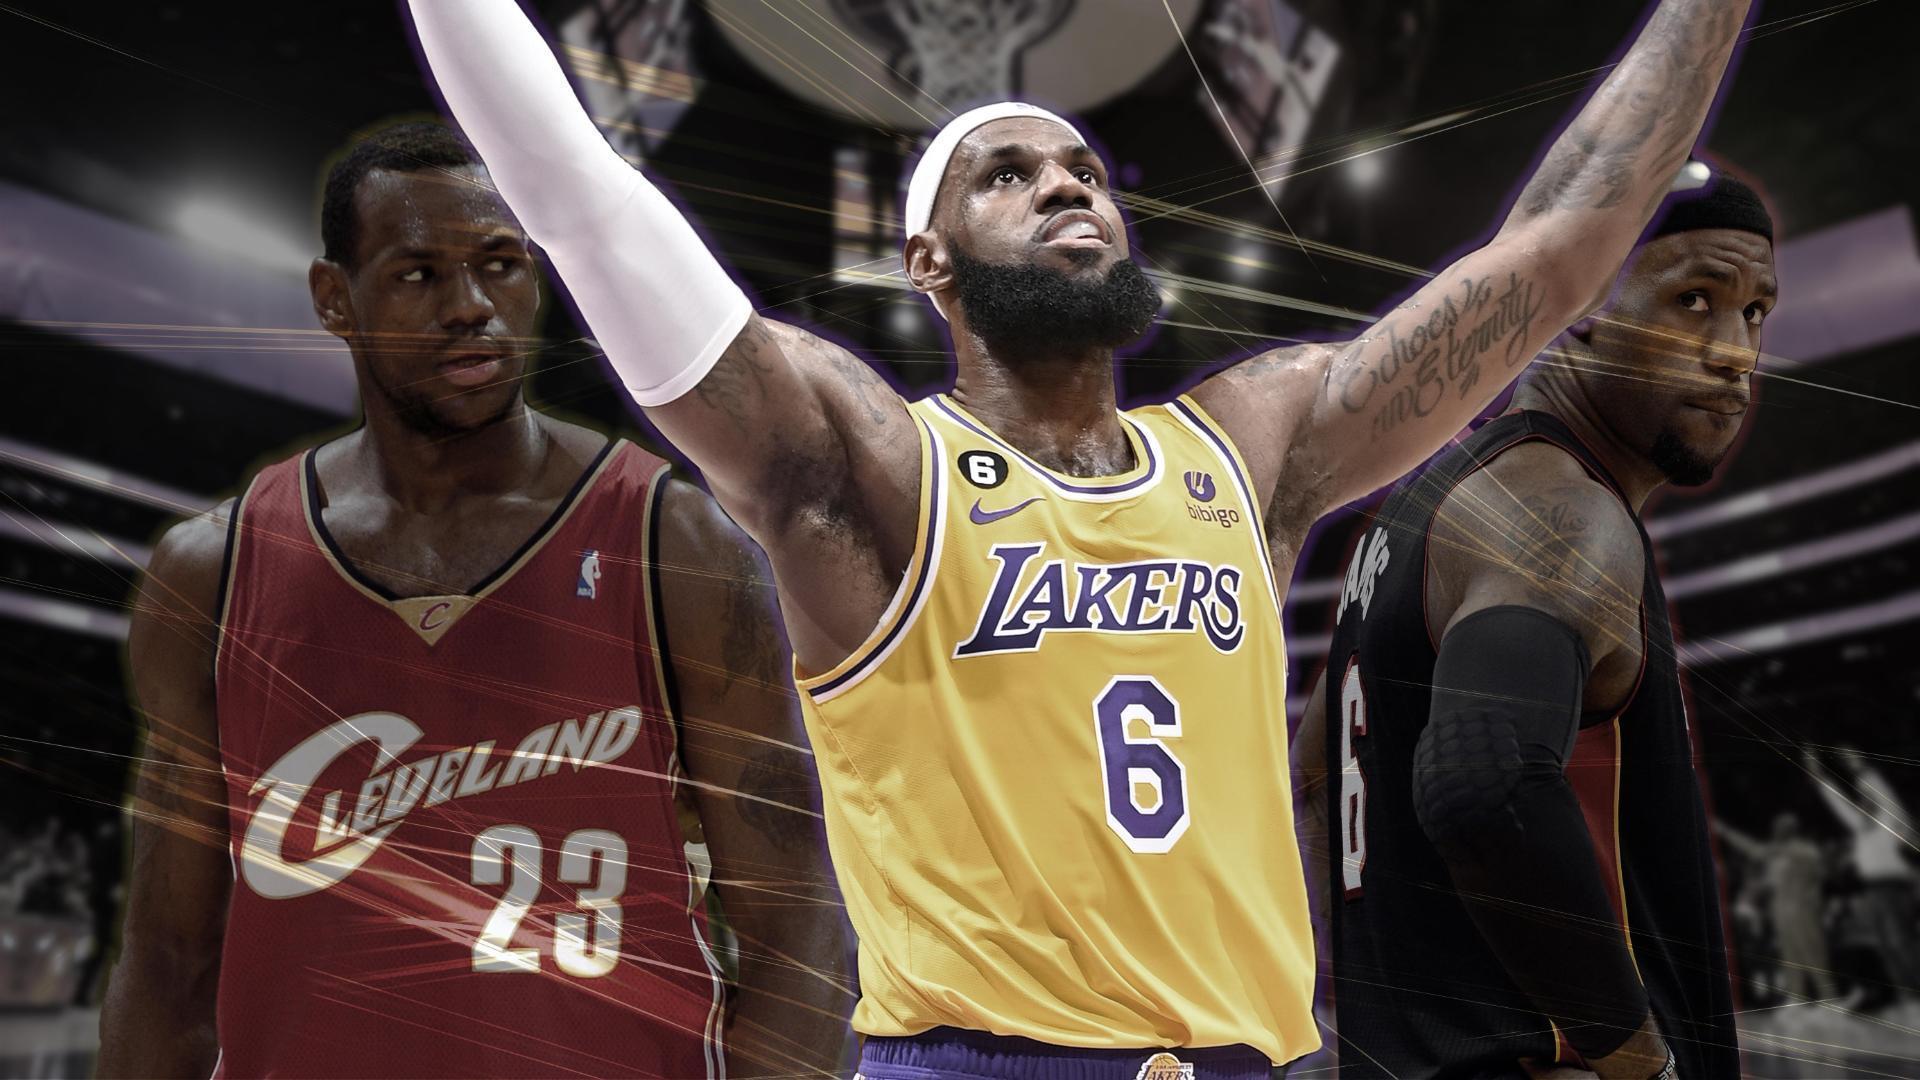 Relive LeBron's milestones on way to becoming scoring king